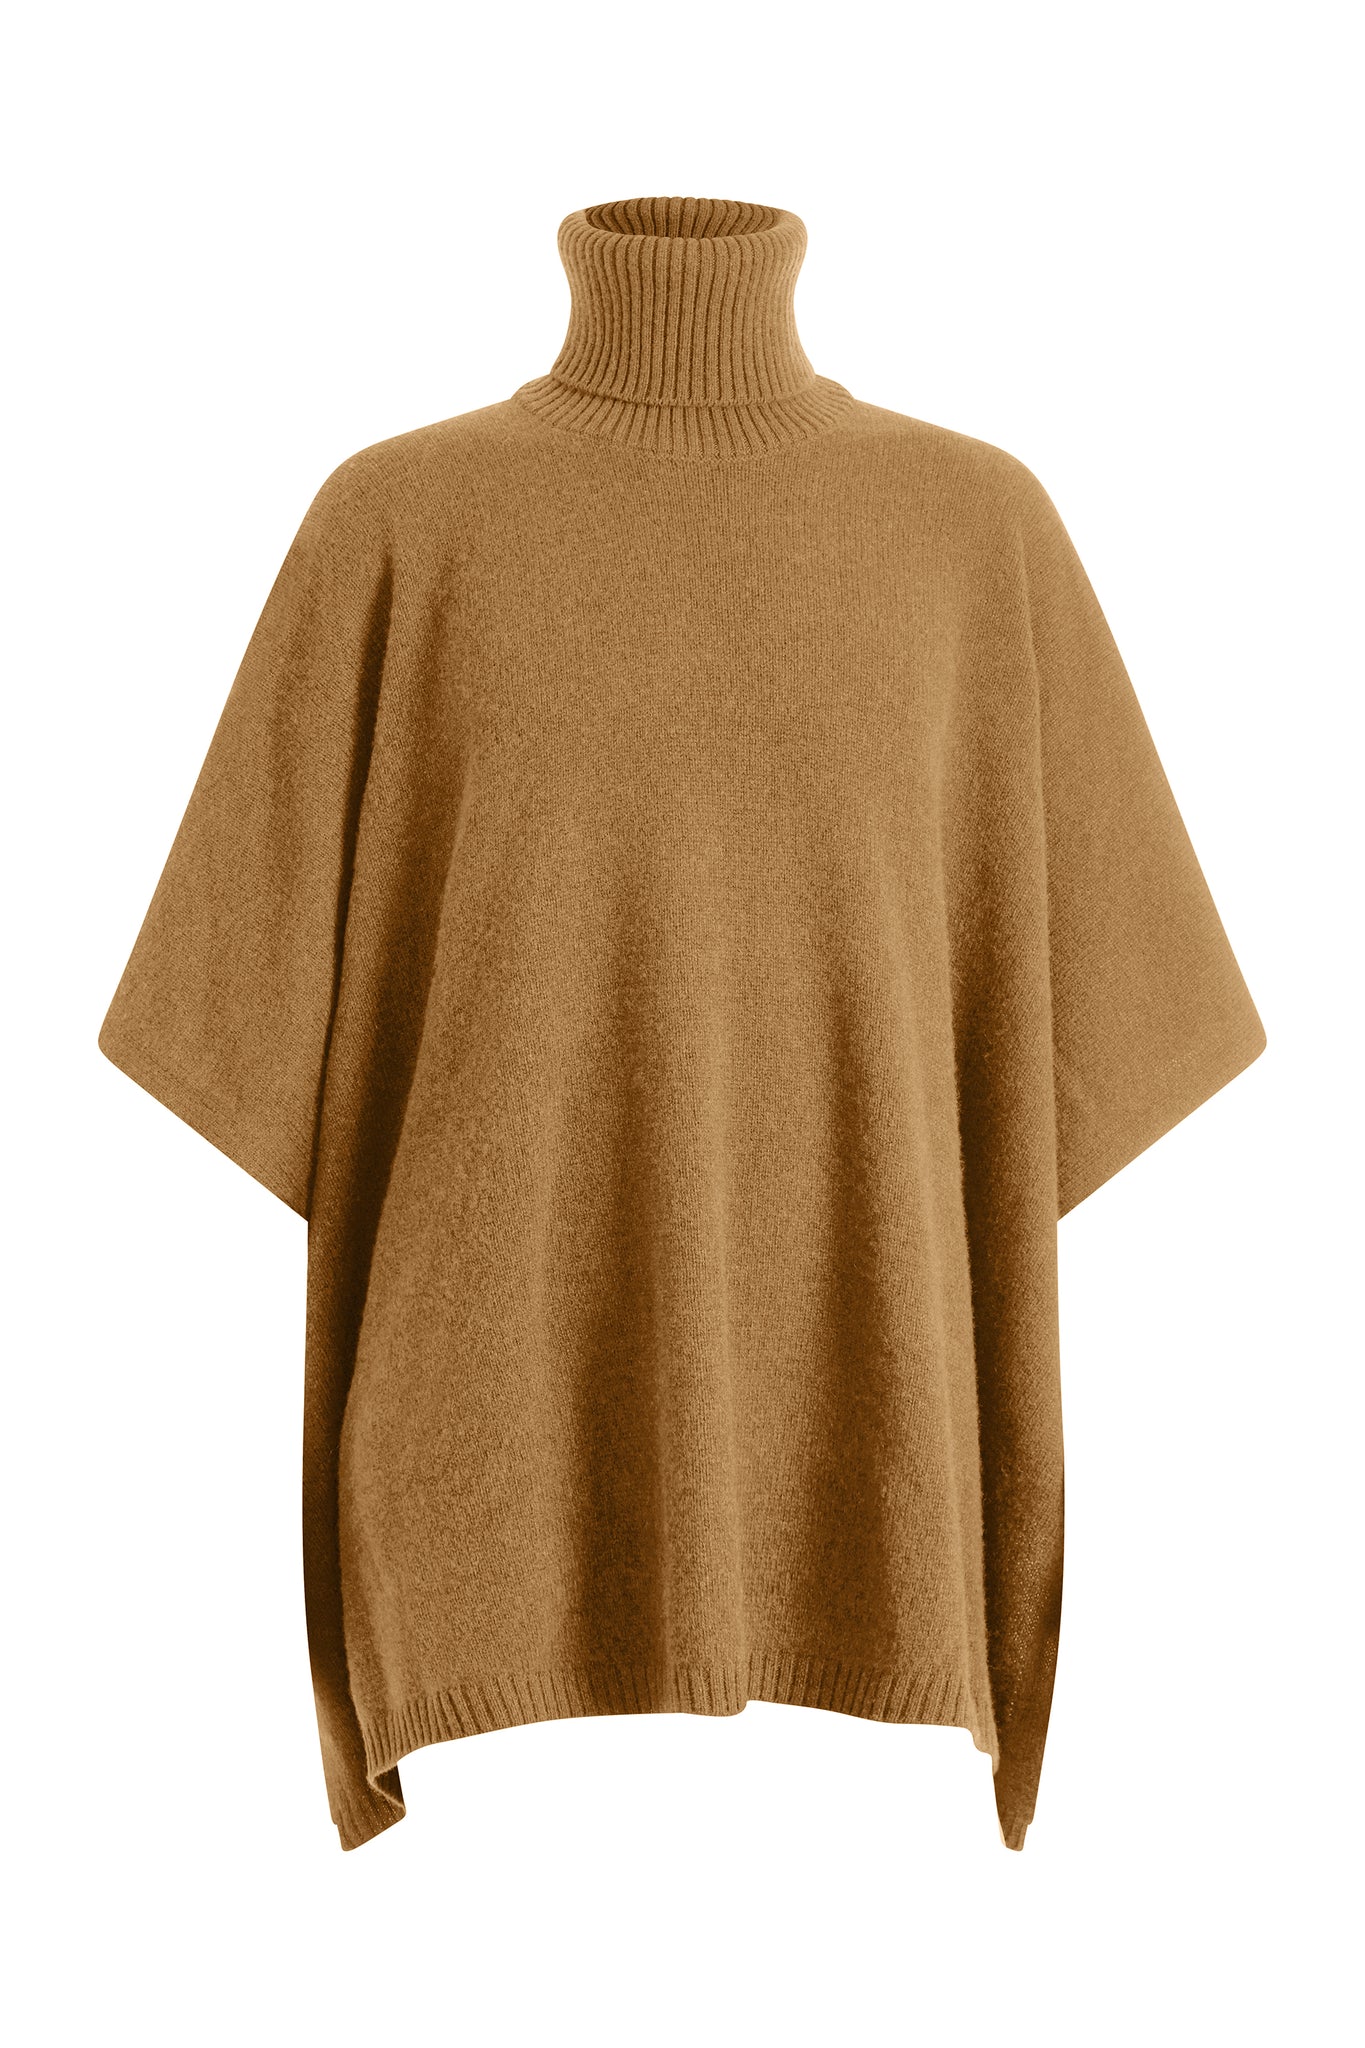 Brown cashmere poncho with turtleneck collar.